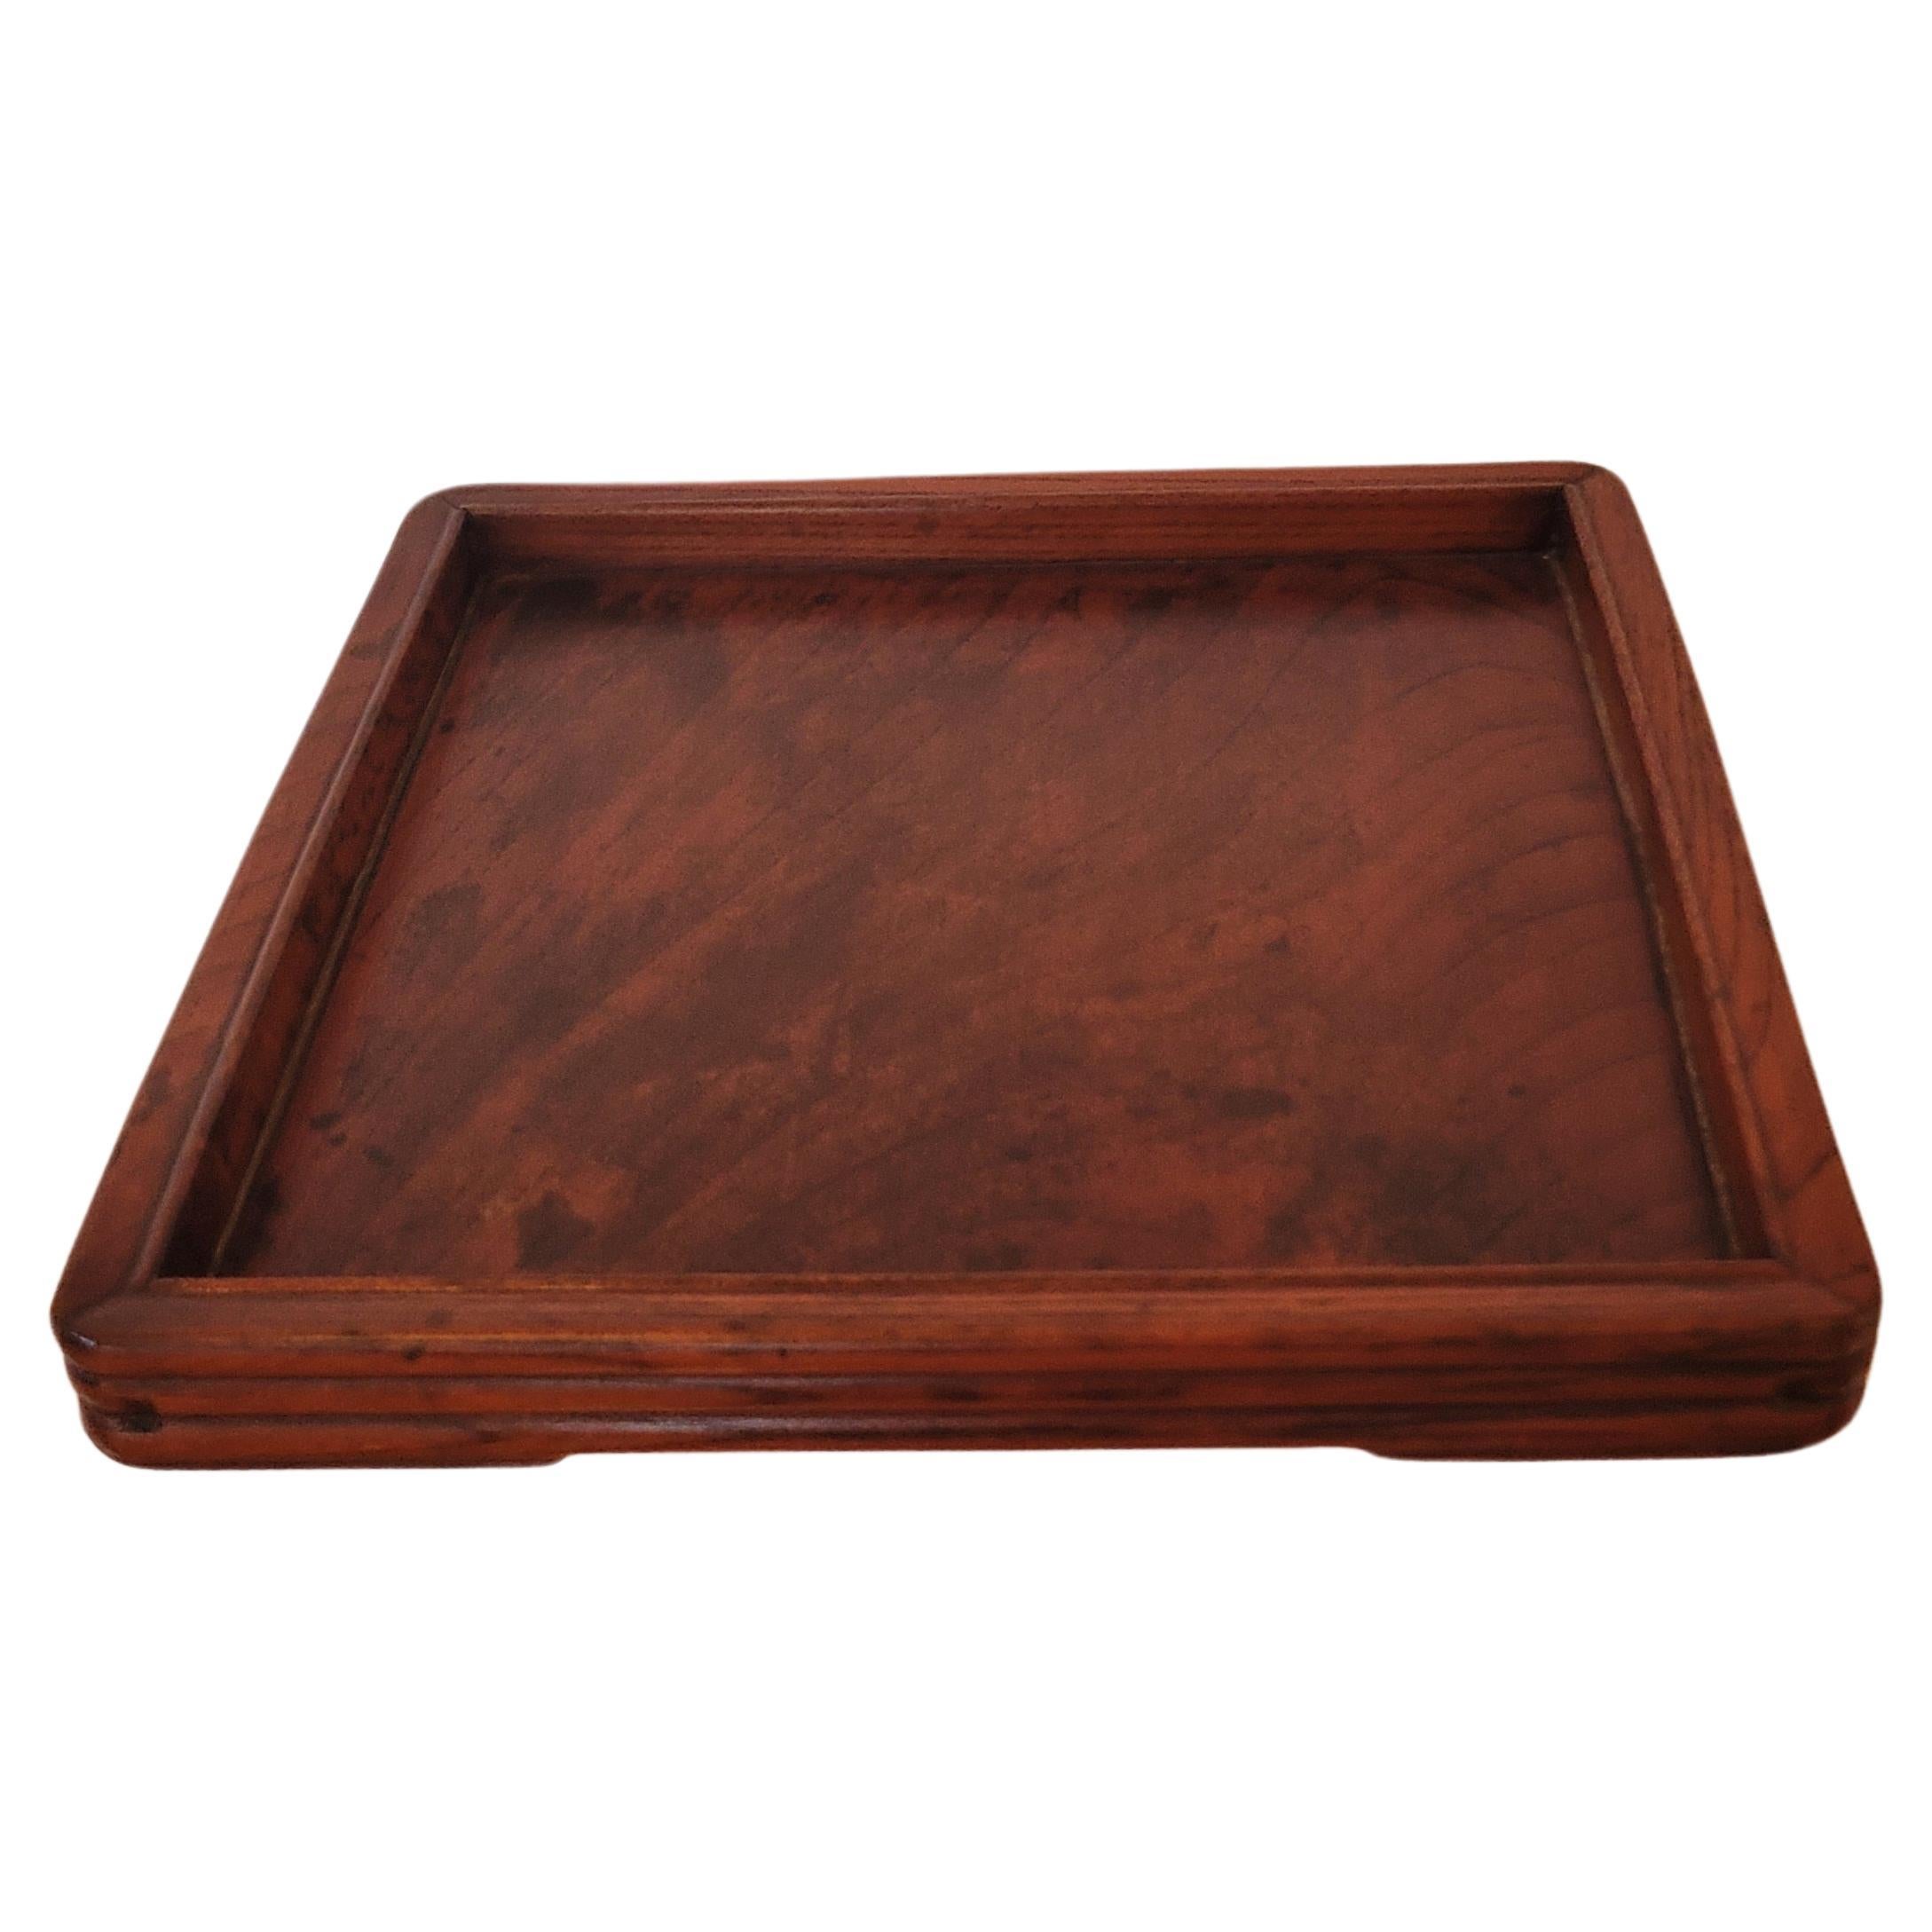 Late 19th Century Tea Tray For Sale